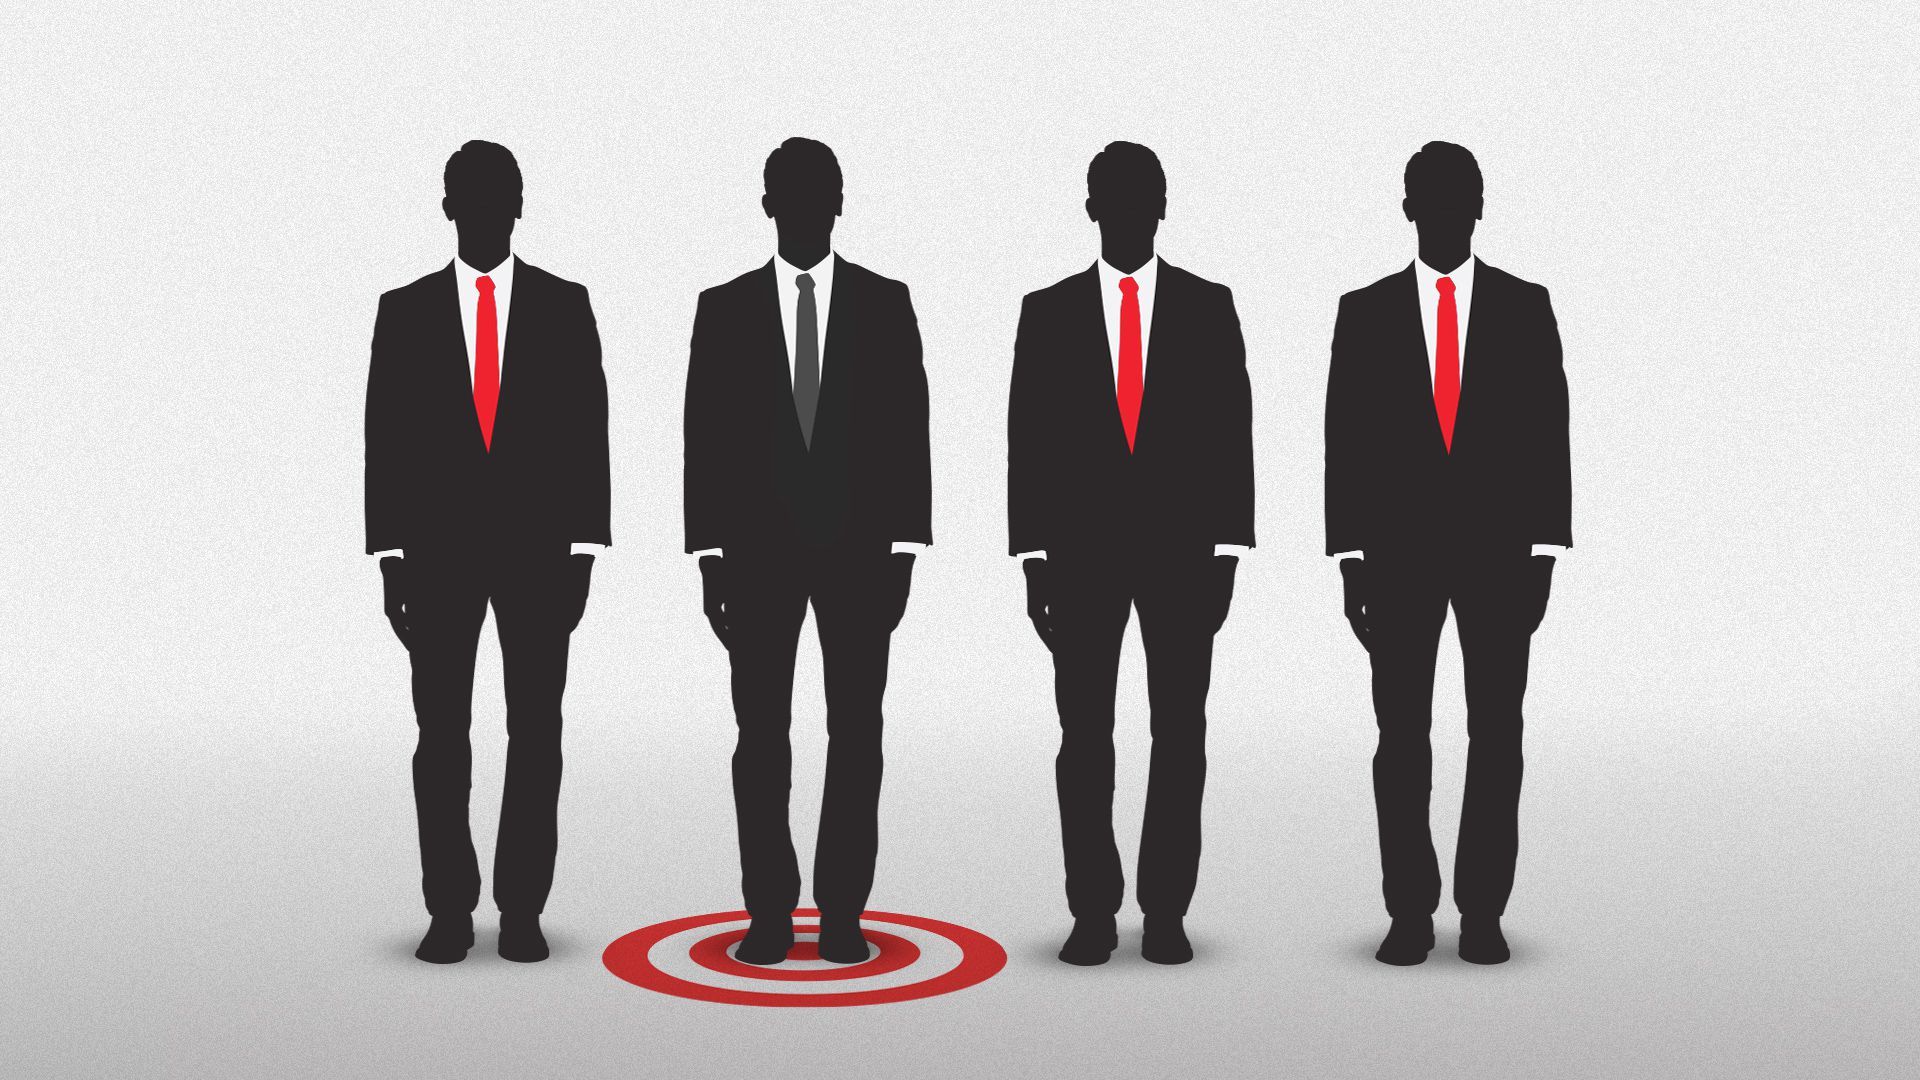 Illustration of four suited business people, all wearing a red tie except for one, the one without a red tie is standing on a red target. 